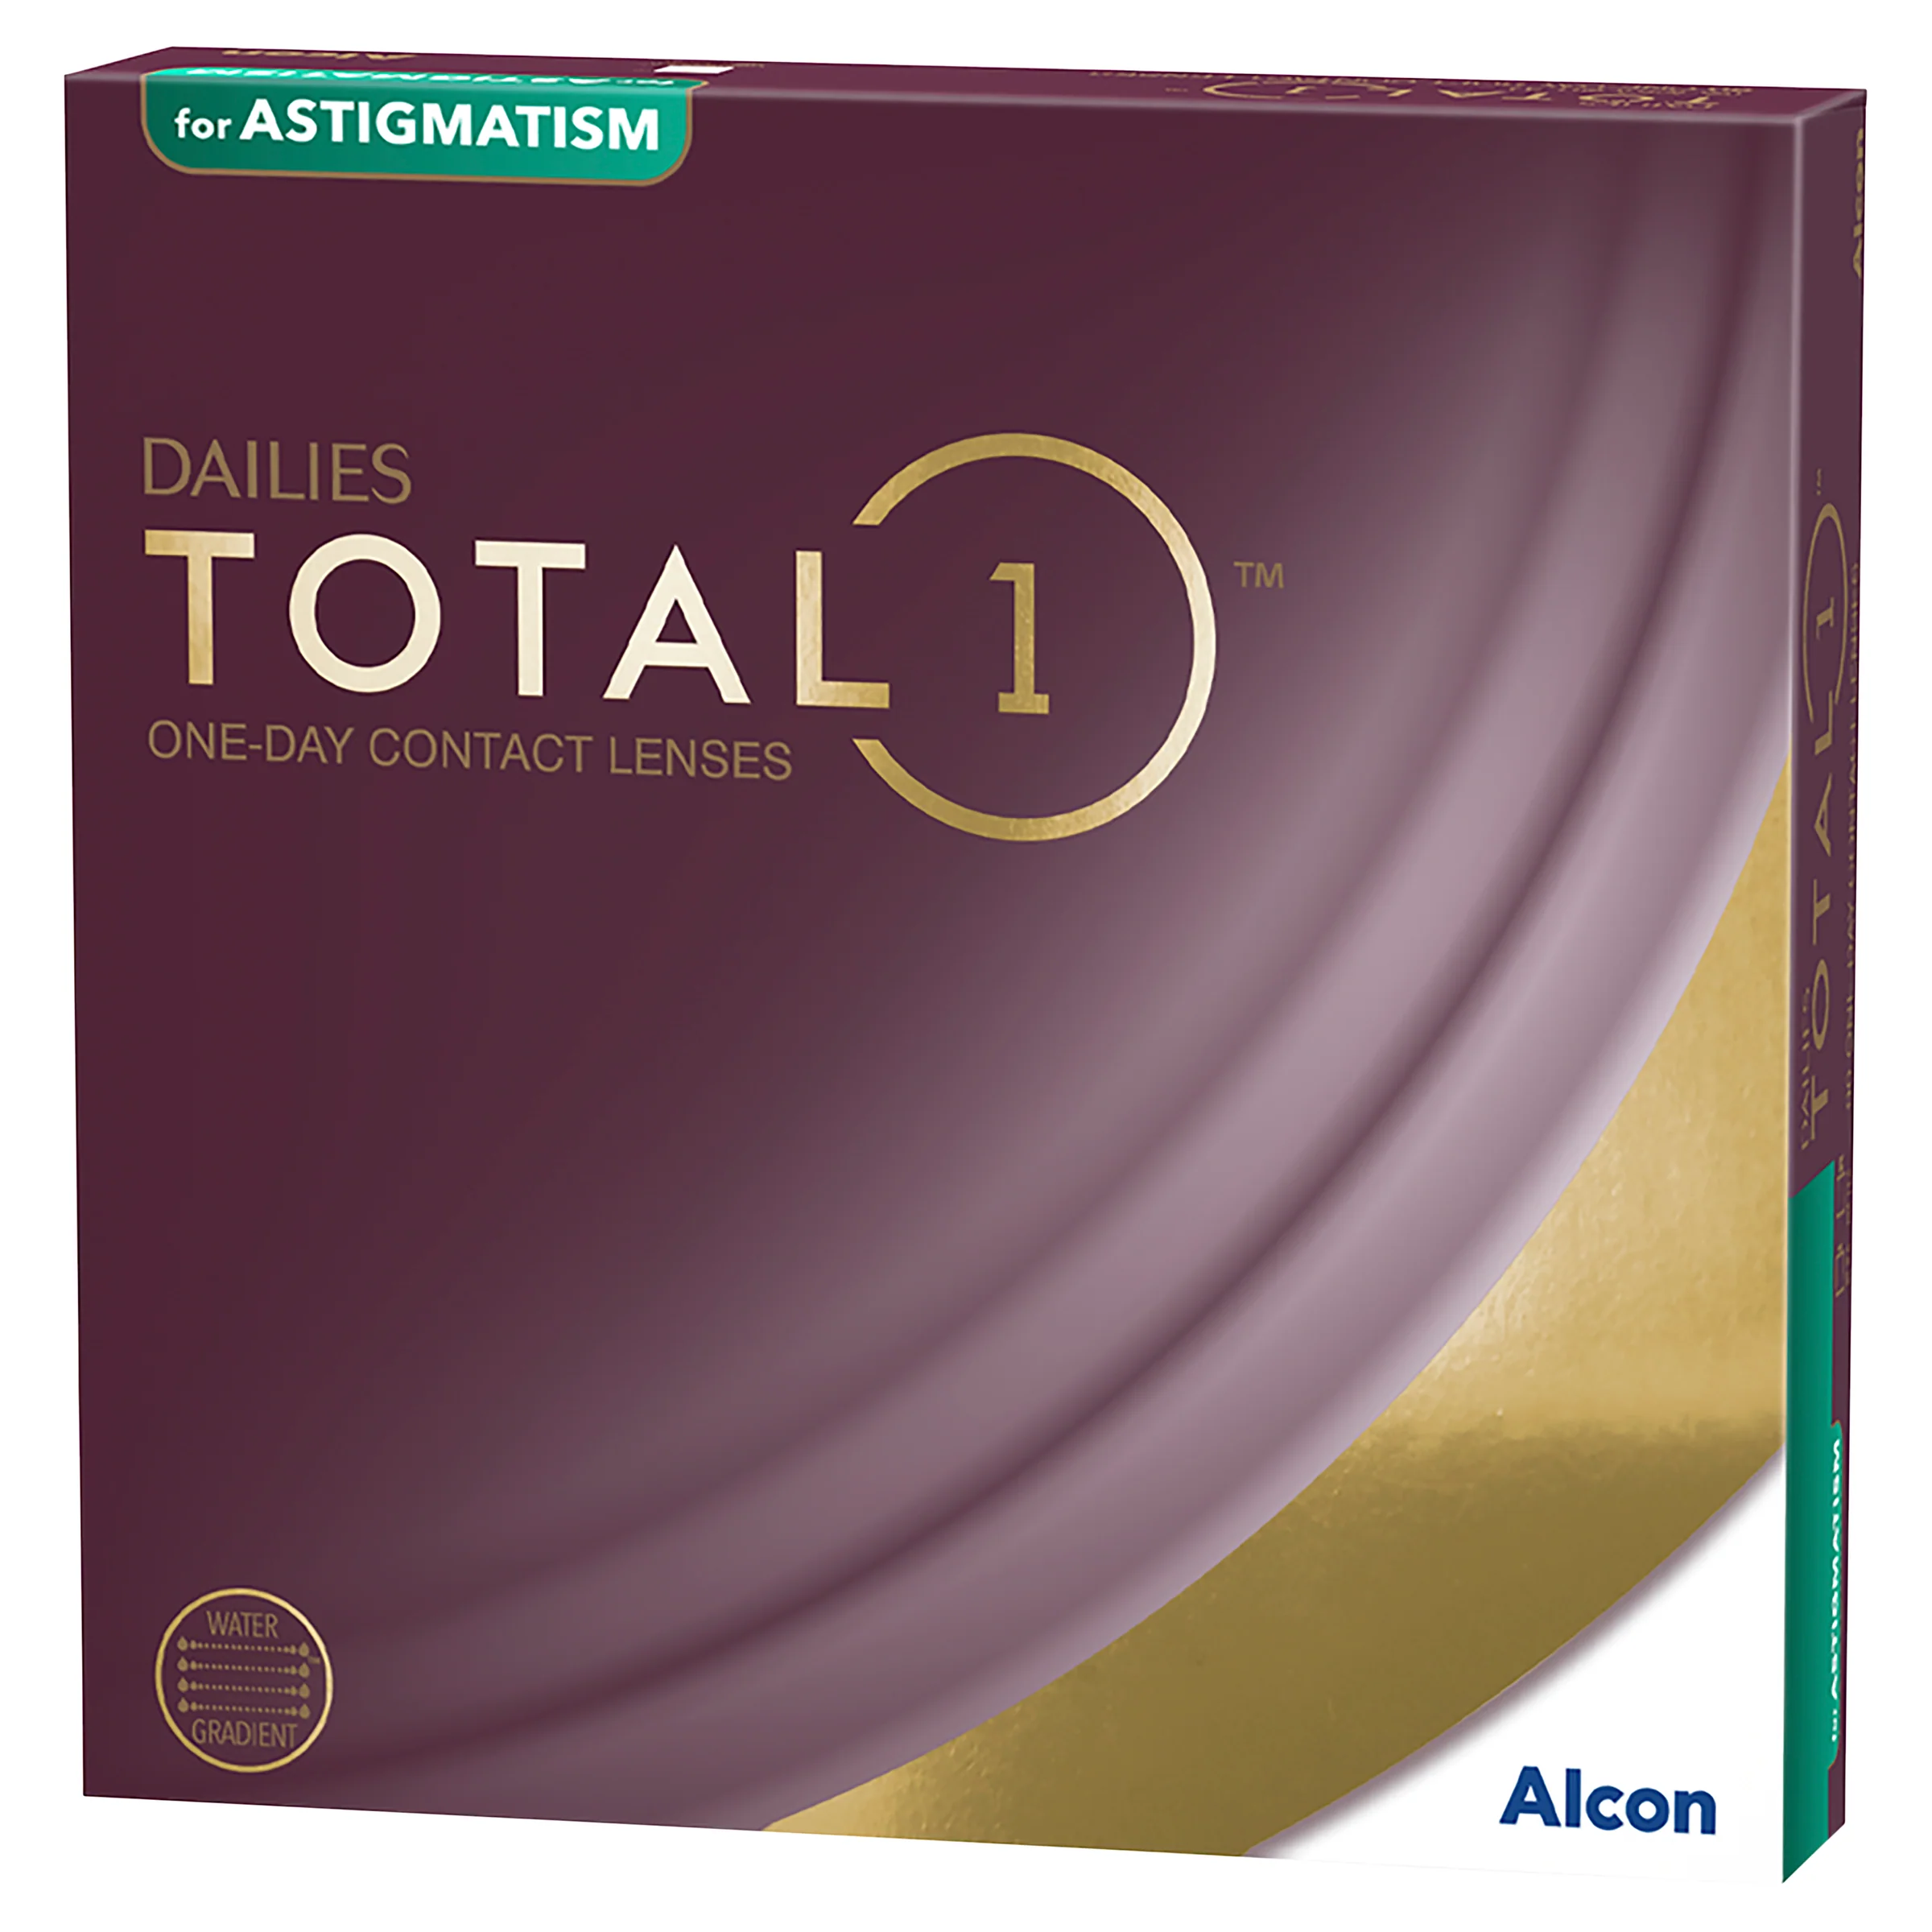 Dailies Total 1 with Astigmatism (90Pk) $165